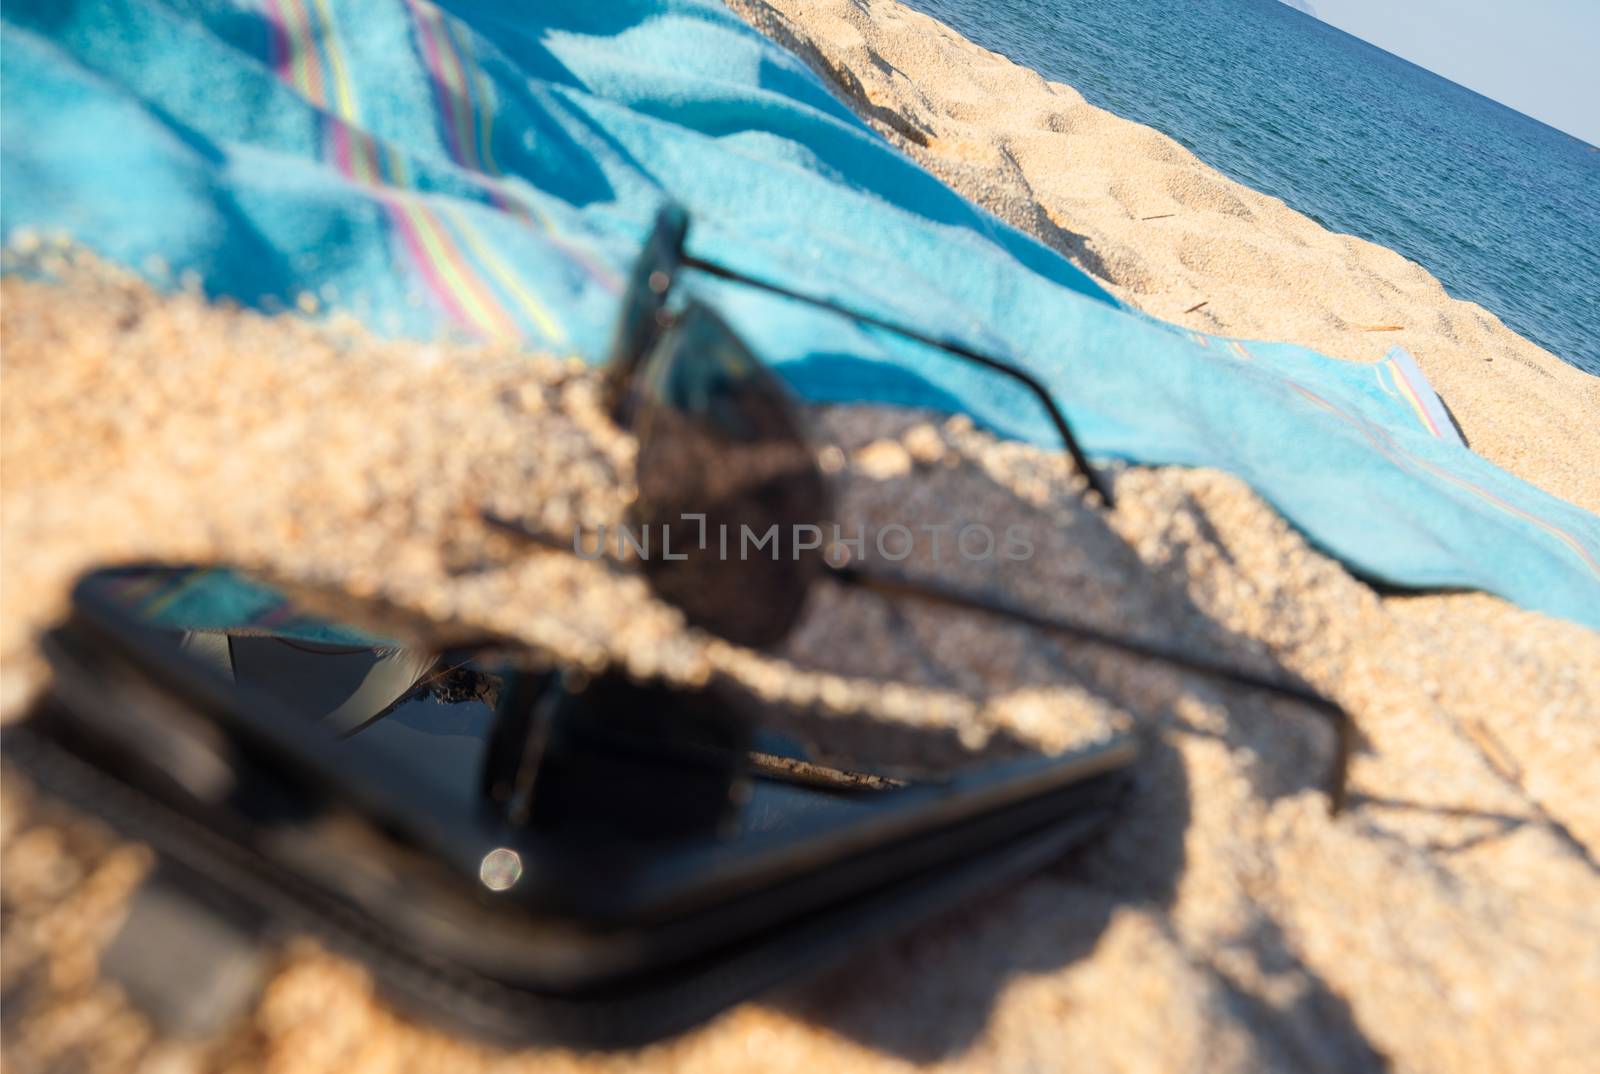 A black smart phone left buried in the send, glasses and towel on the beach with the see on focus.